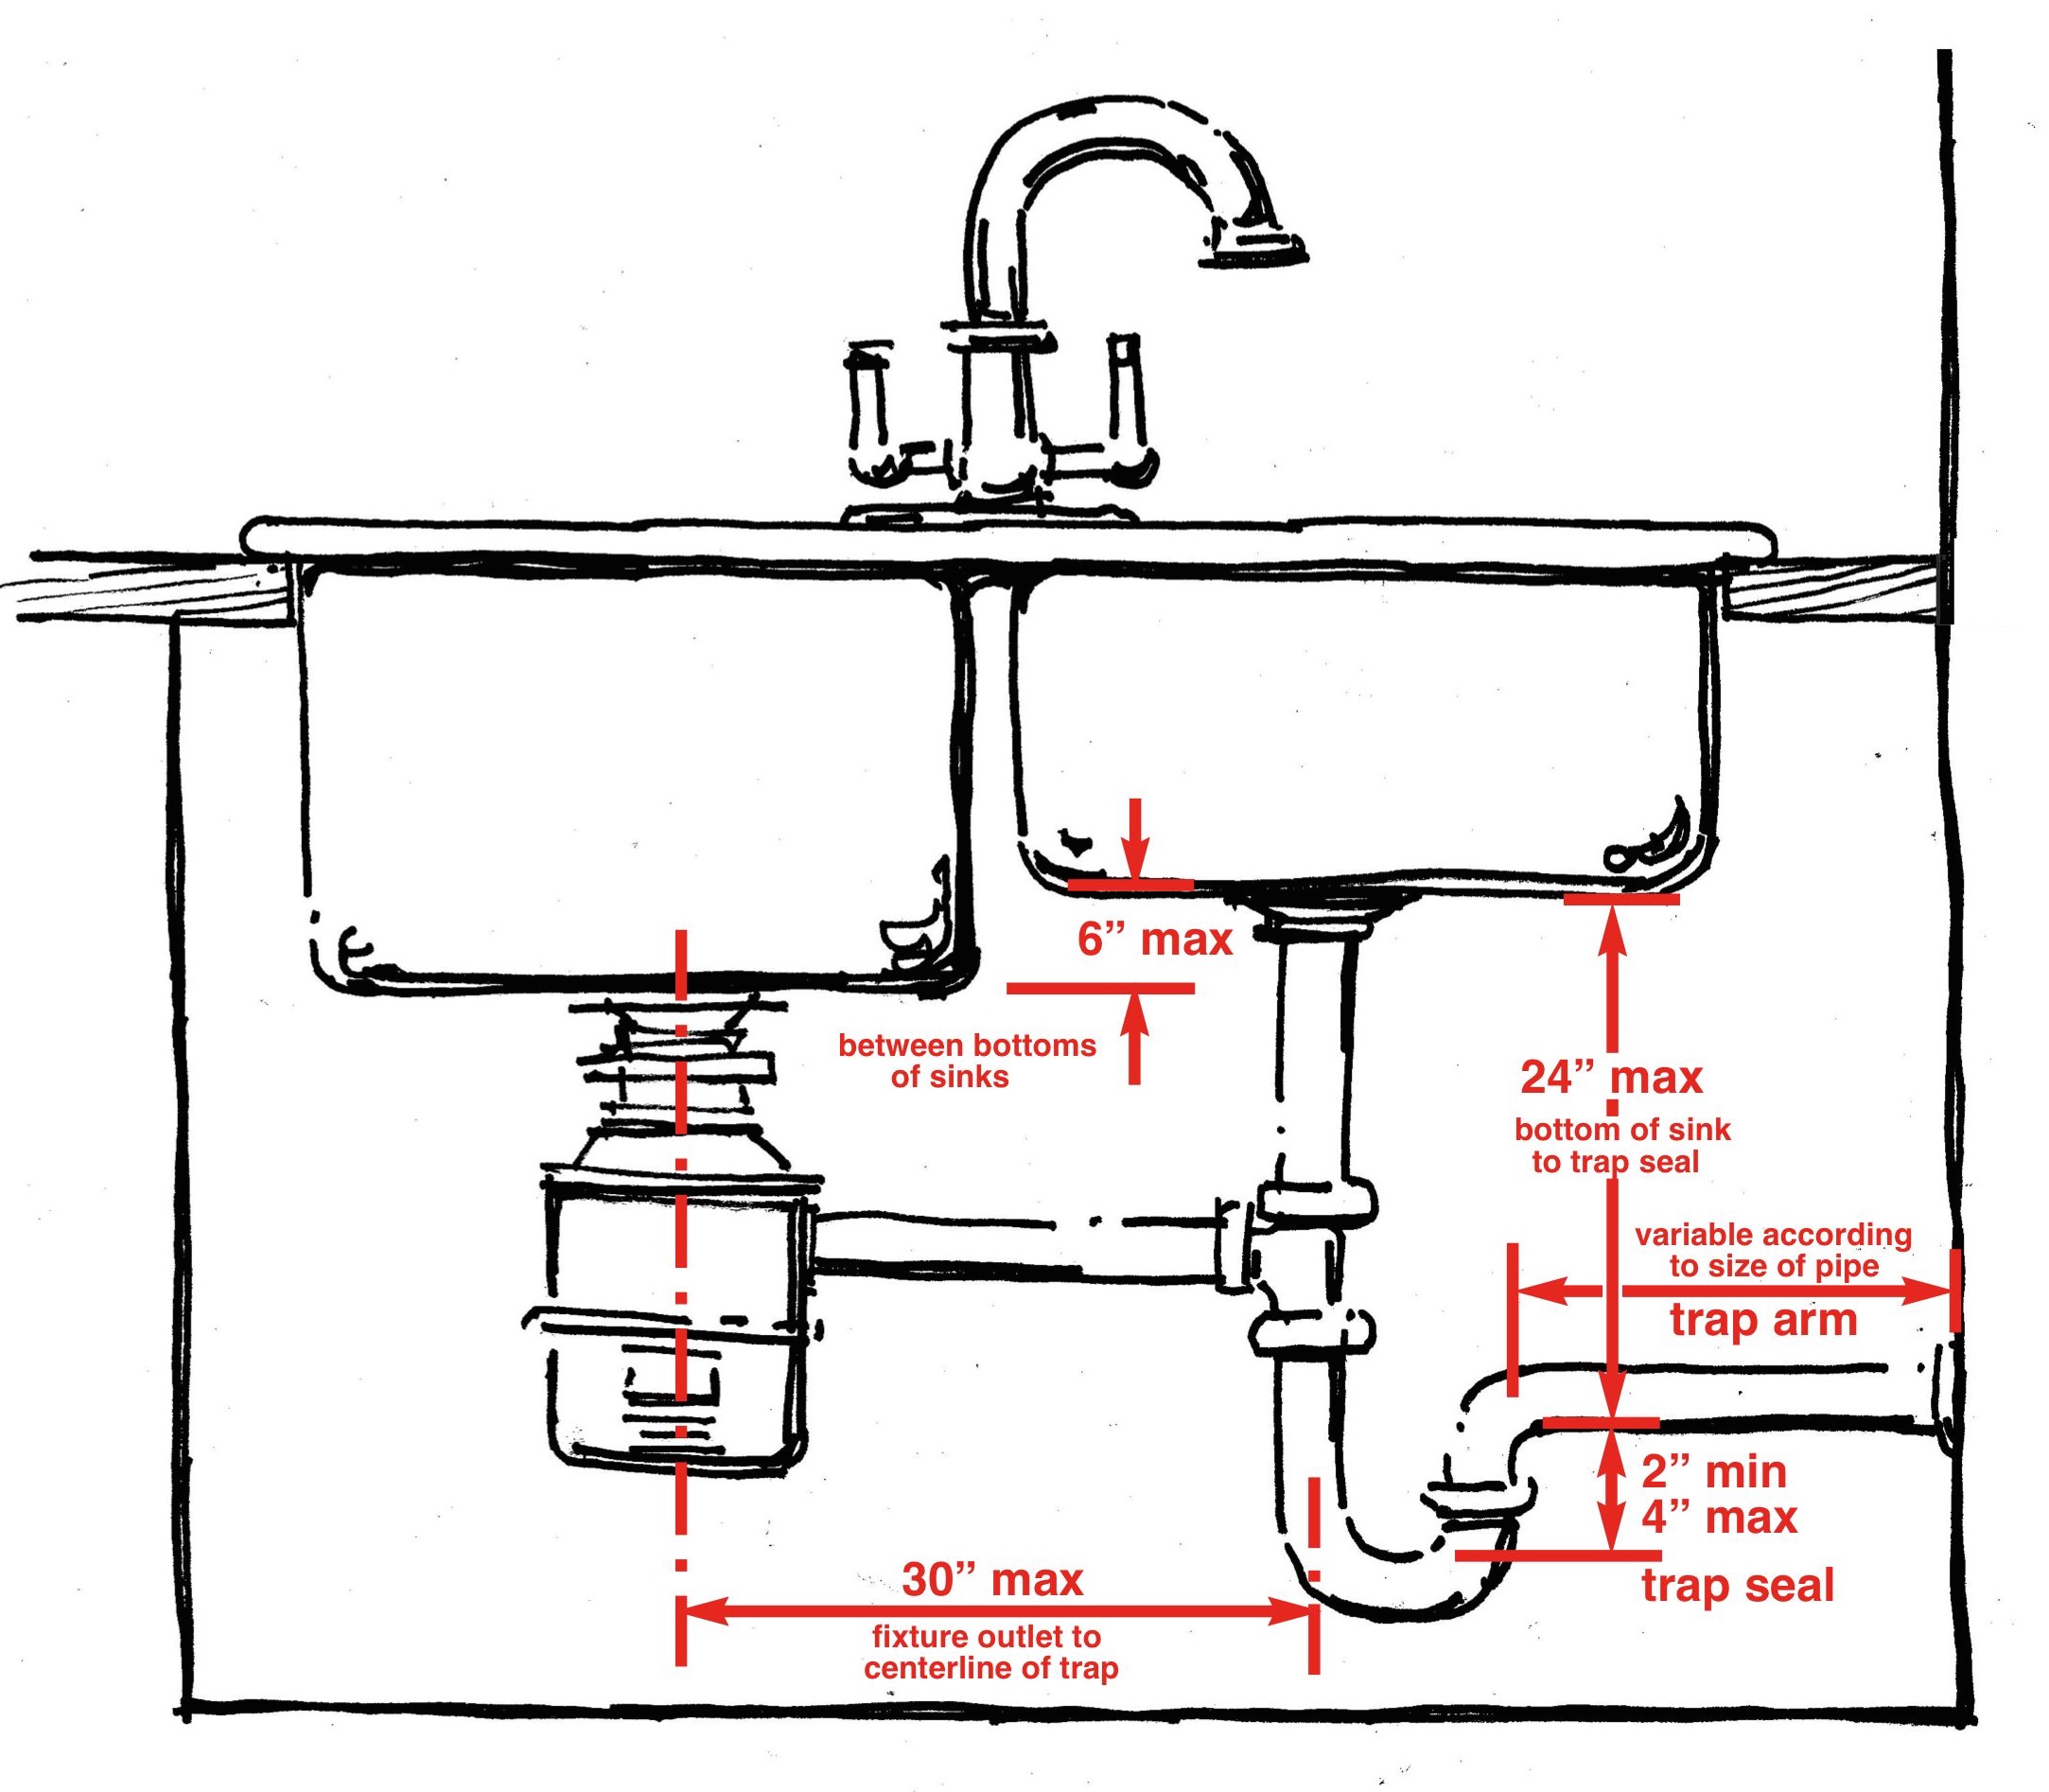 Get Stylish And Cool Plumbing Diagram Kitchen Sink For Every Home - Maeveskitchen.com